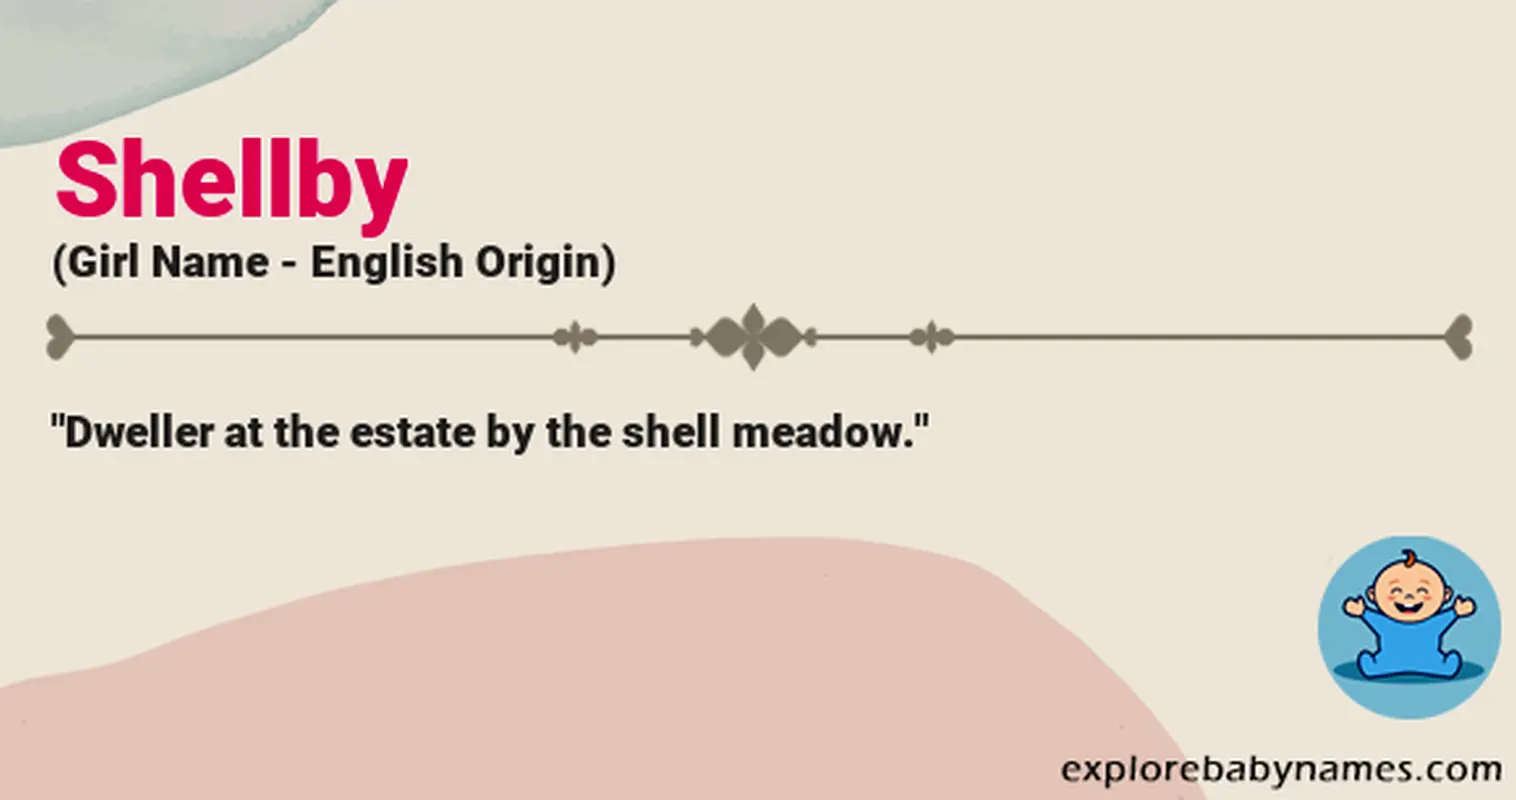 Meaning of Shellby